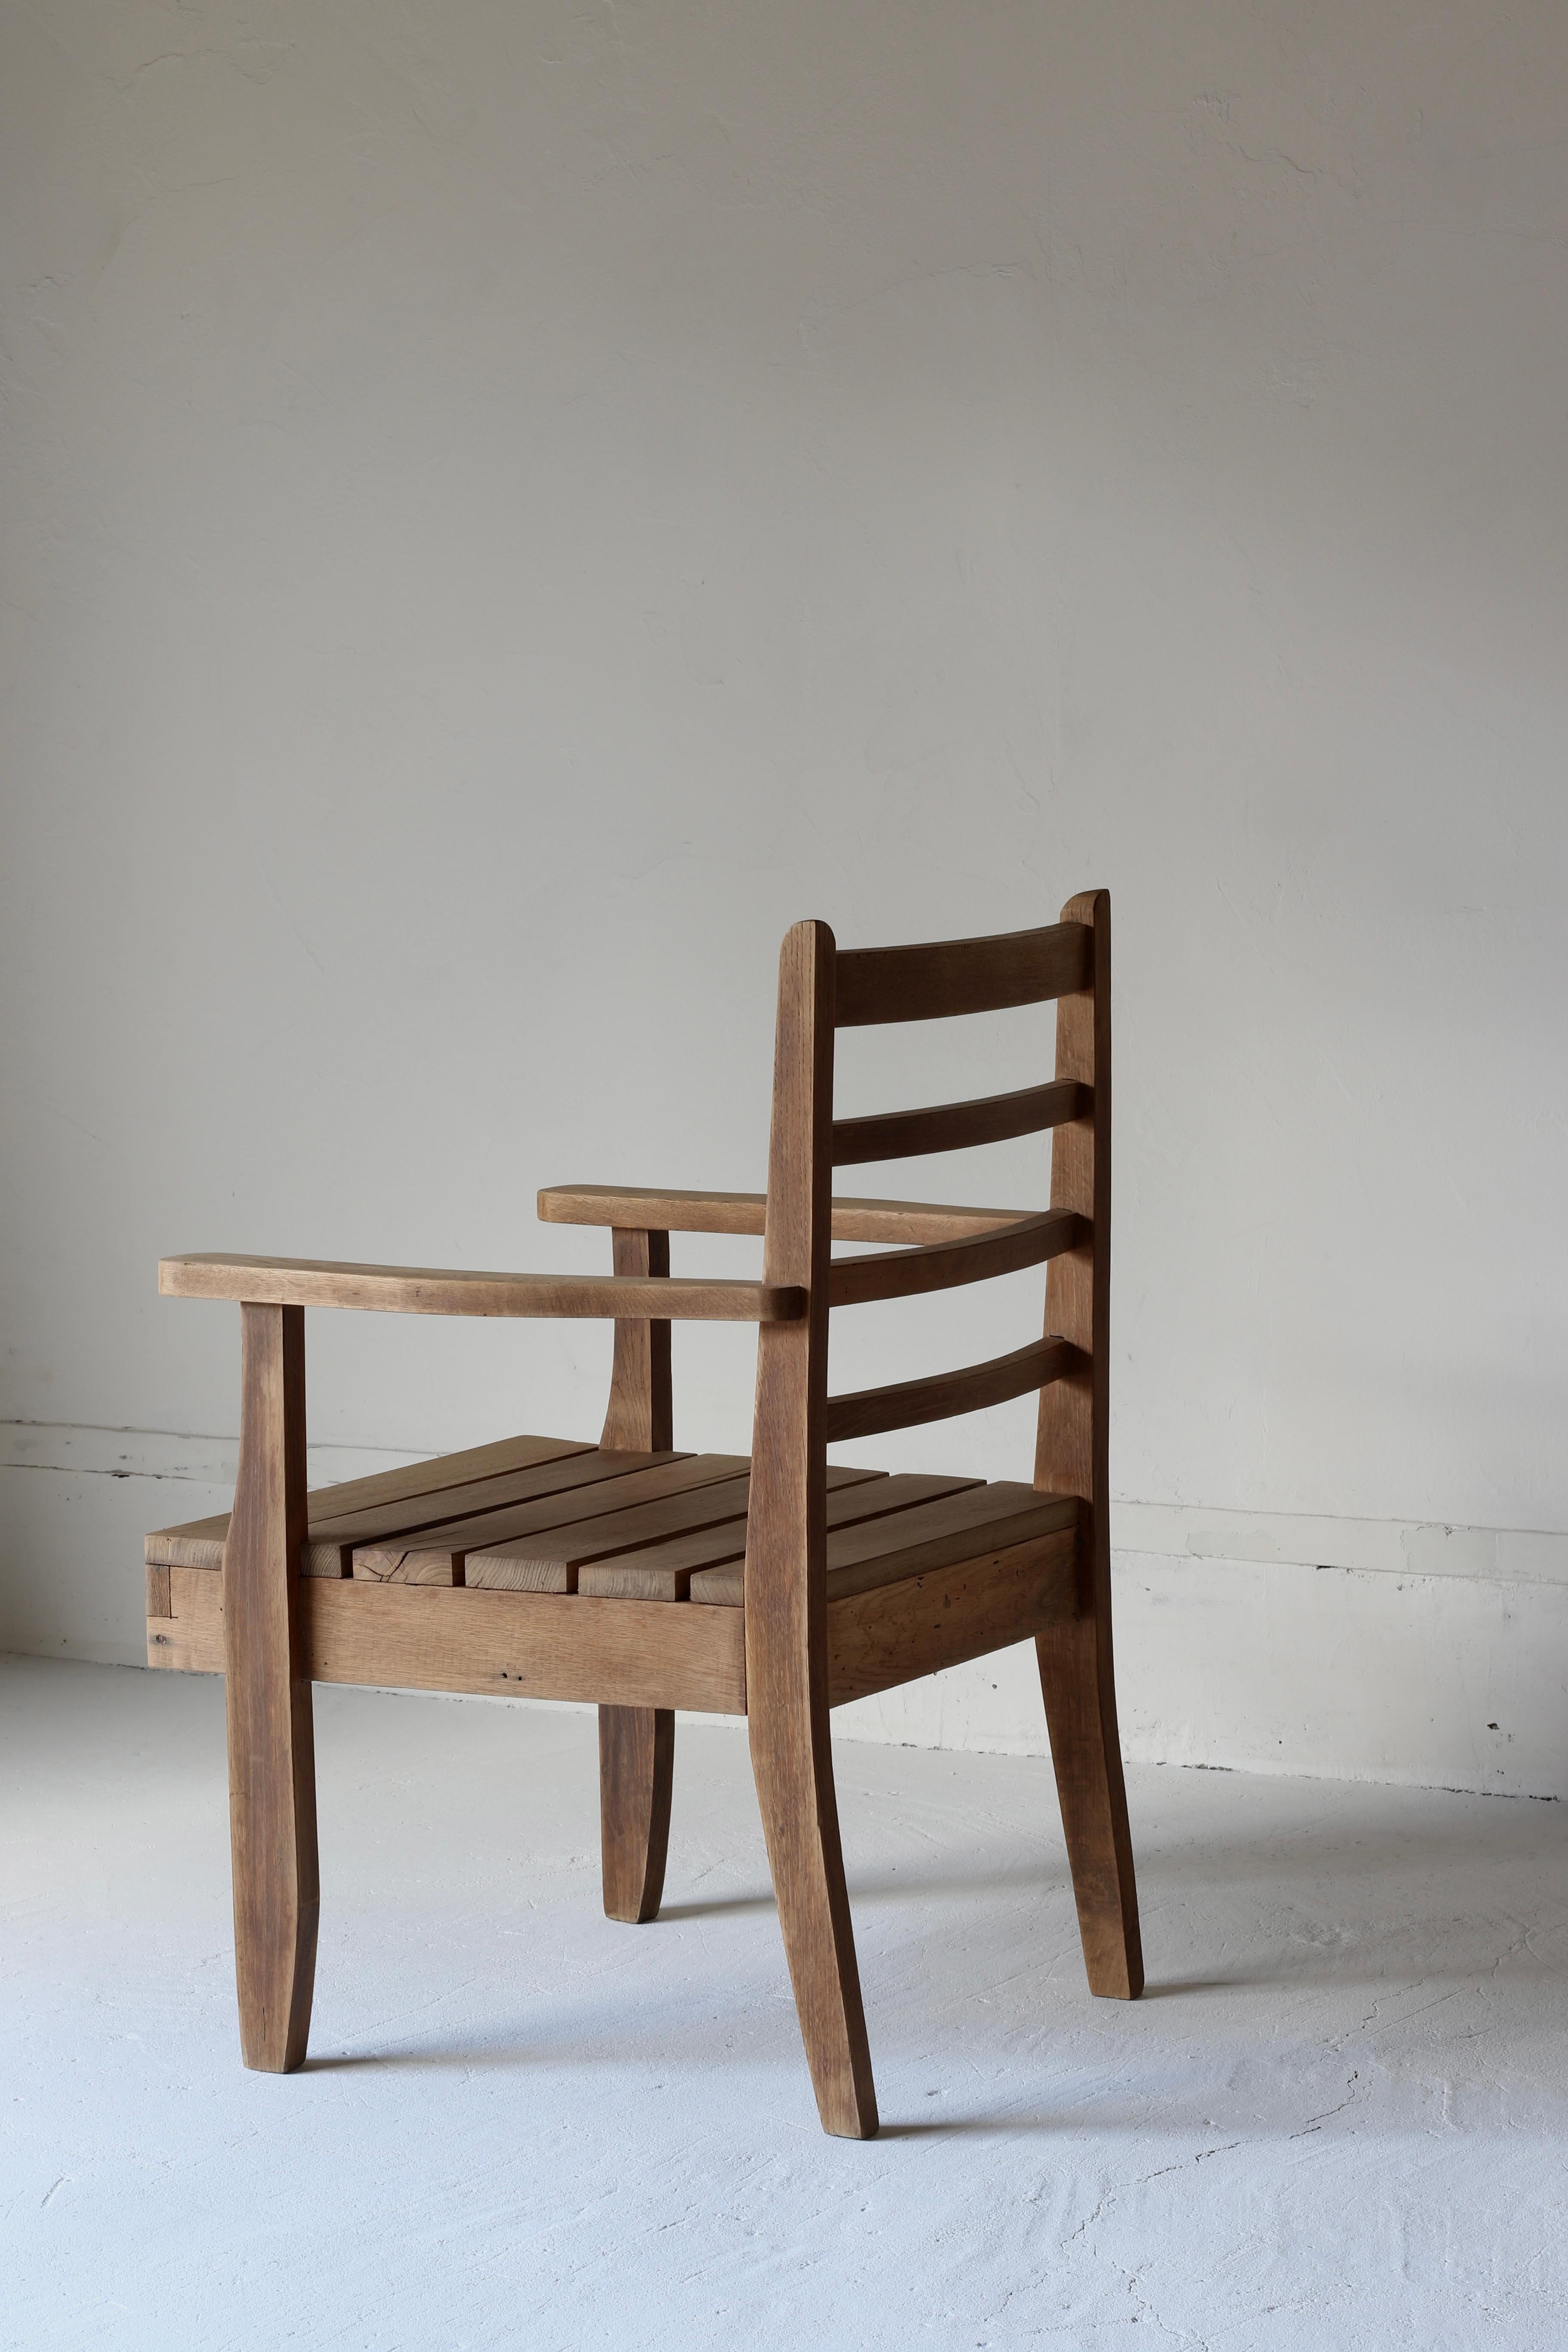 This wooden chair is originally an old Japanese chair.

The frame is made of oak, and the seat is made of chestnuts.

Originally, the seat surface was an old chair using straw and spring, but it was all removed and a new seat surface made of